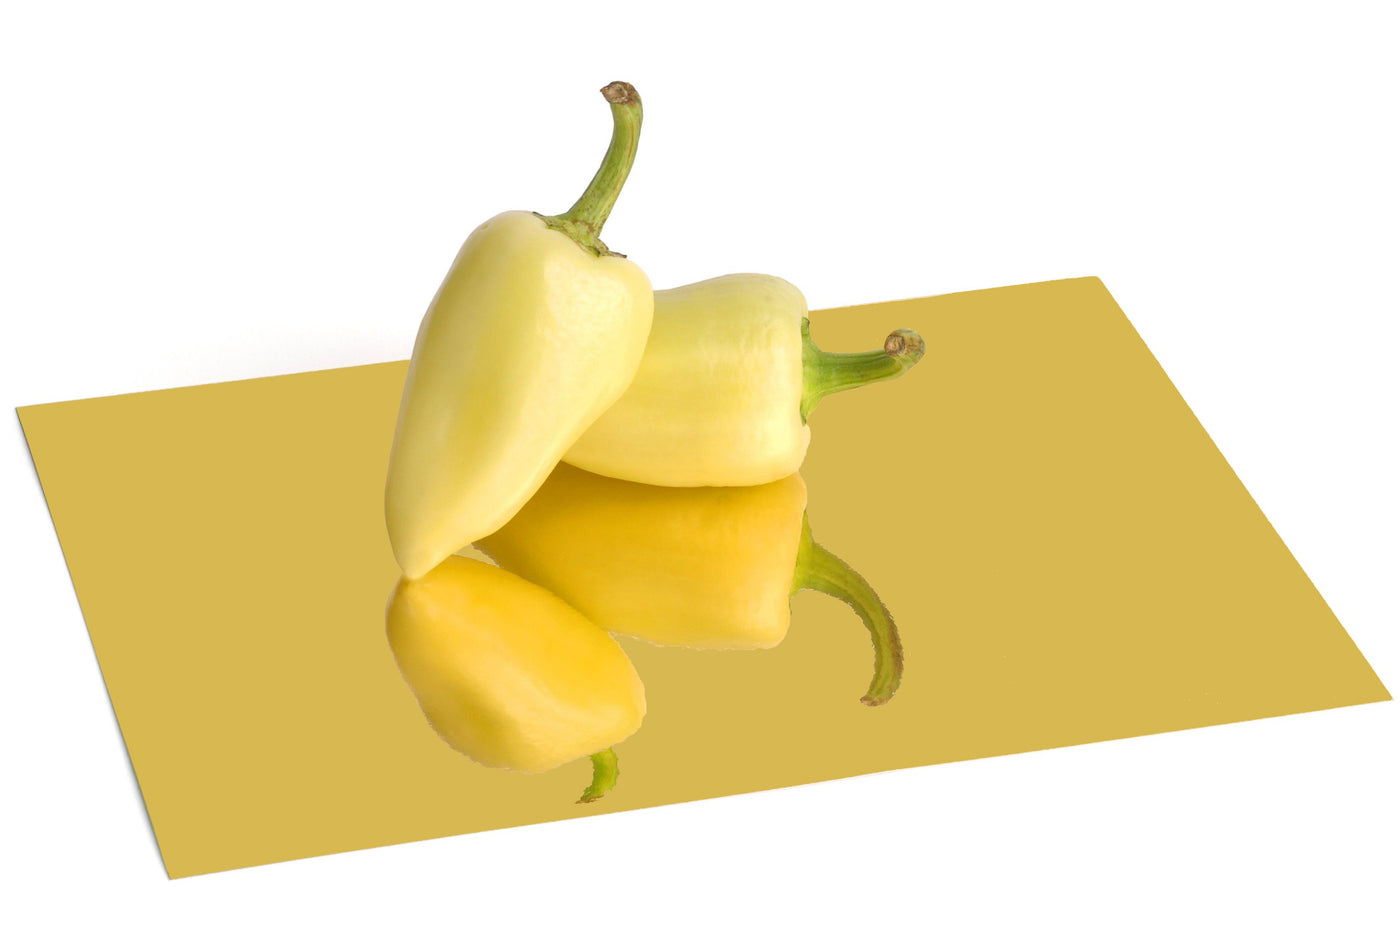 Gold foil board with a reflective, mirrored finish. Two peppers sit atop the foil board and are reflected in its surface.